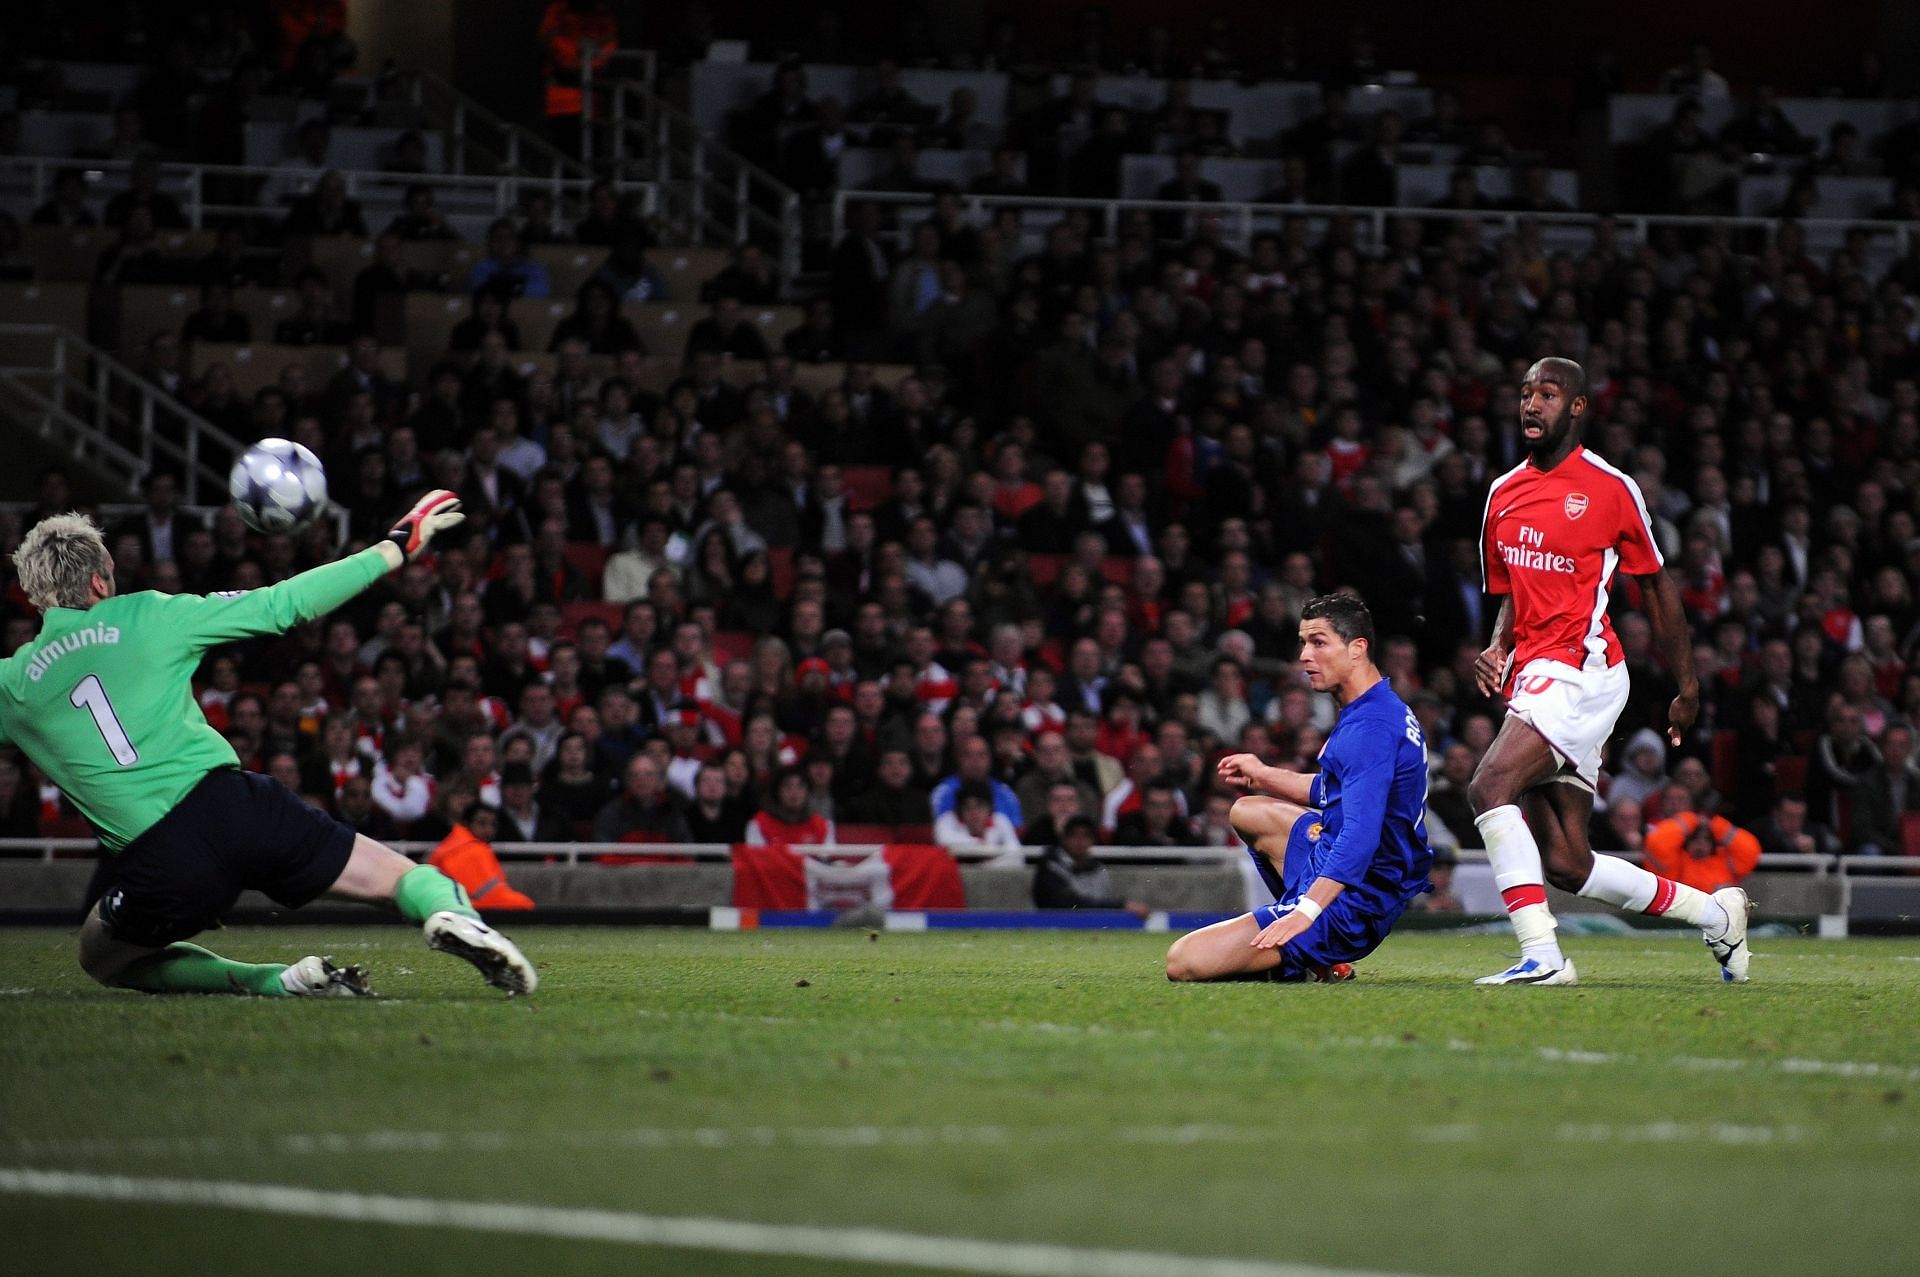 Arsenal v Manchester United - UEFA Champions League Semi-Final (Photo by Shaun Botterill/Getty Images)